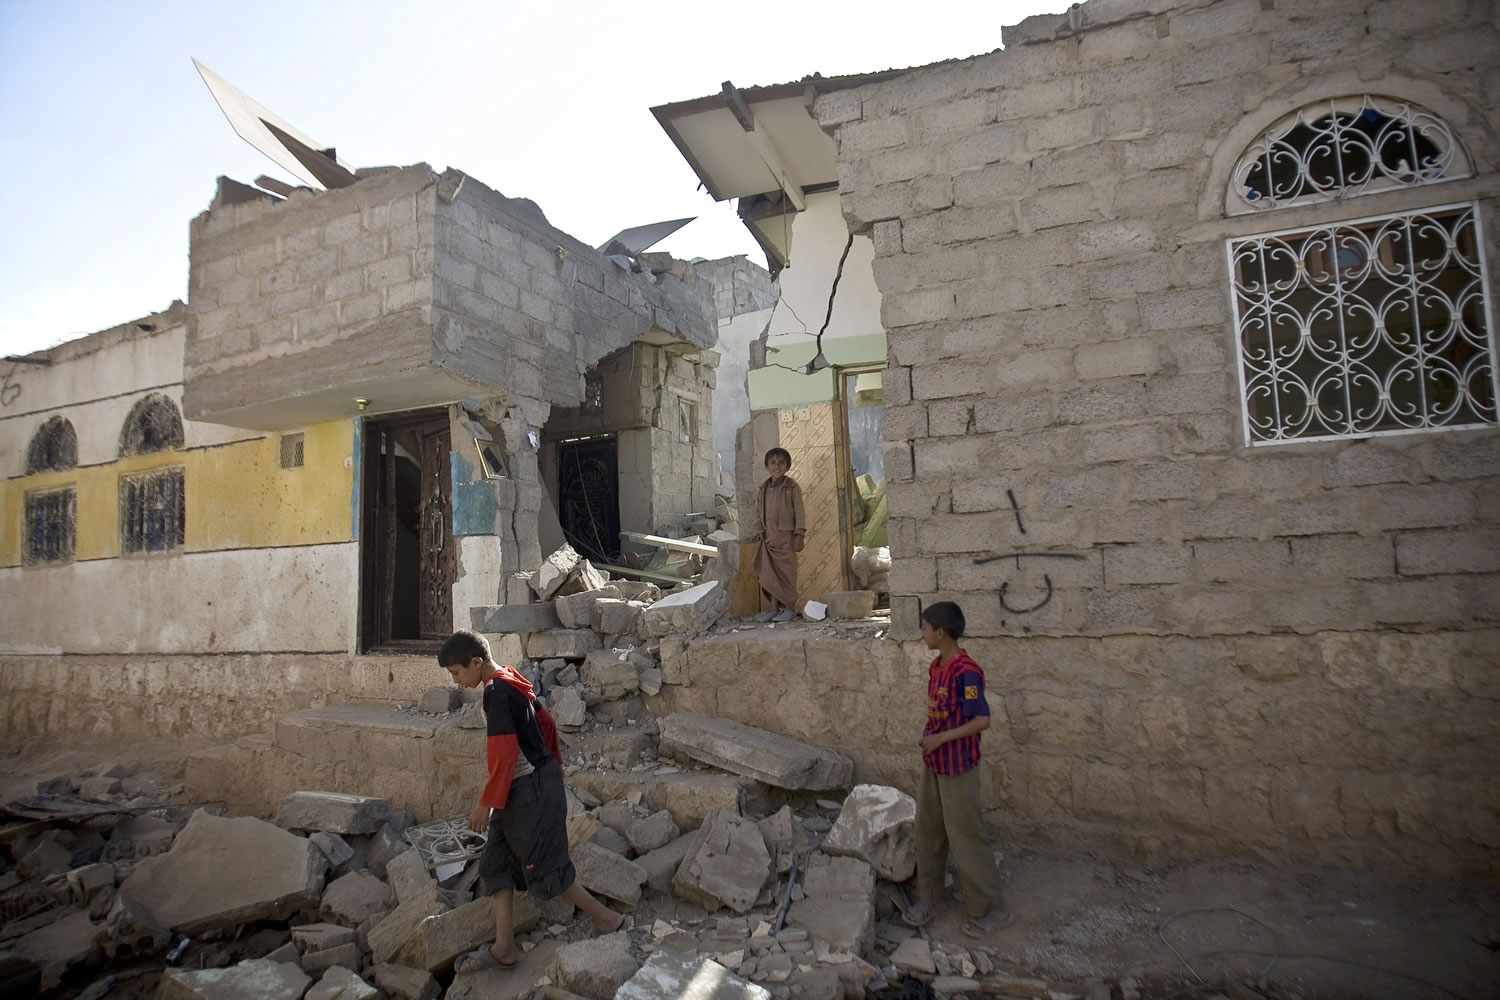 Yemeni boys gather at their house destroyed by Saudi airstrikes near the airport in Sanaa, Yemen, on Tuesday.